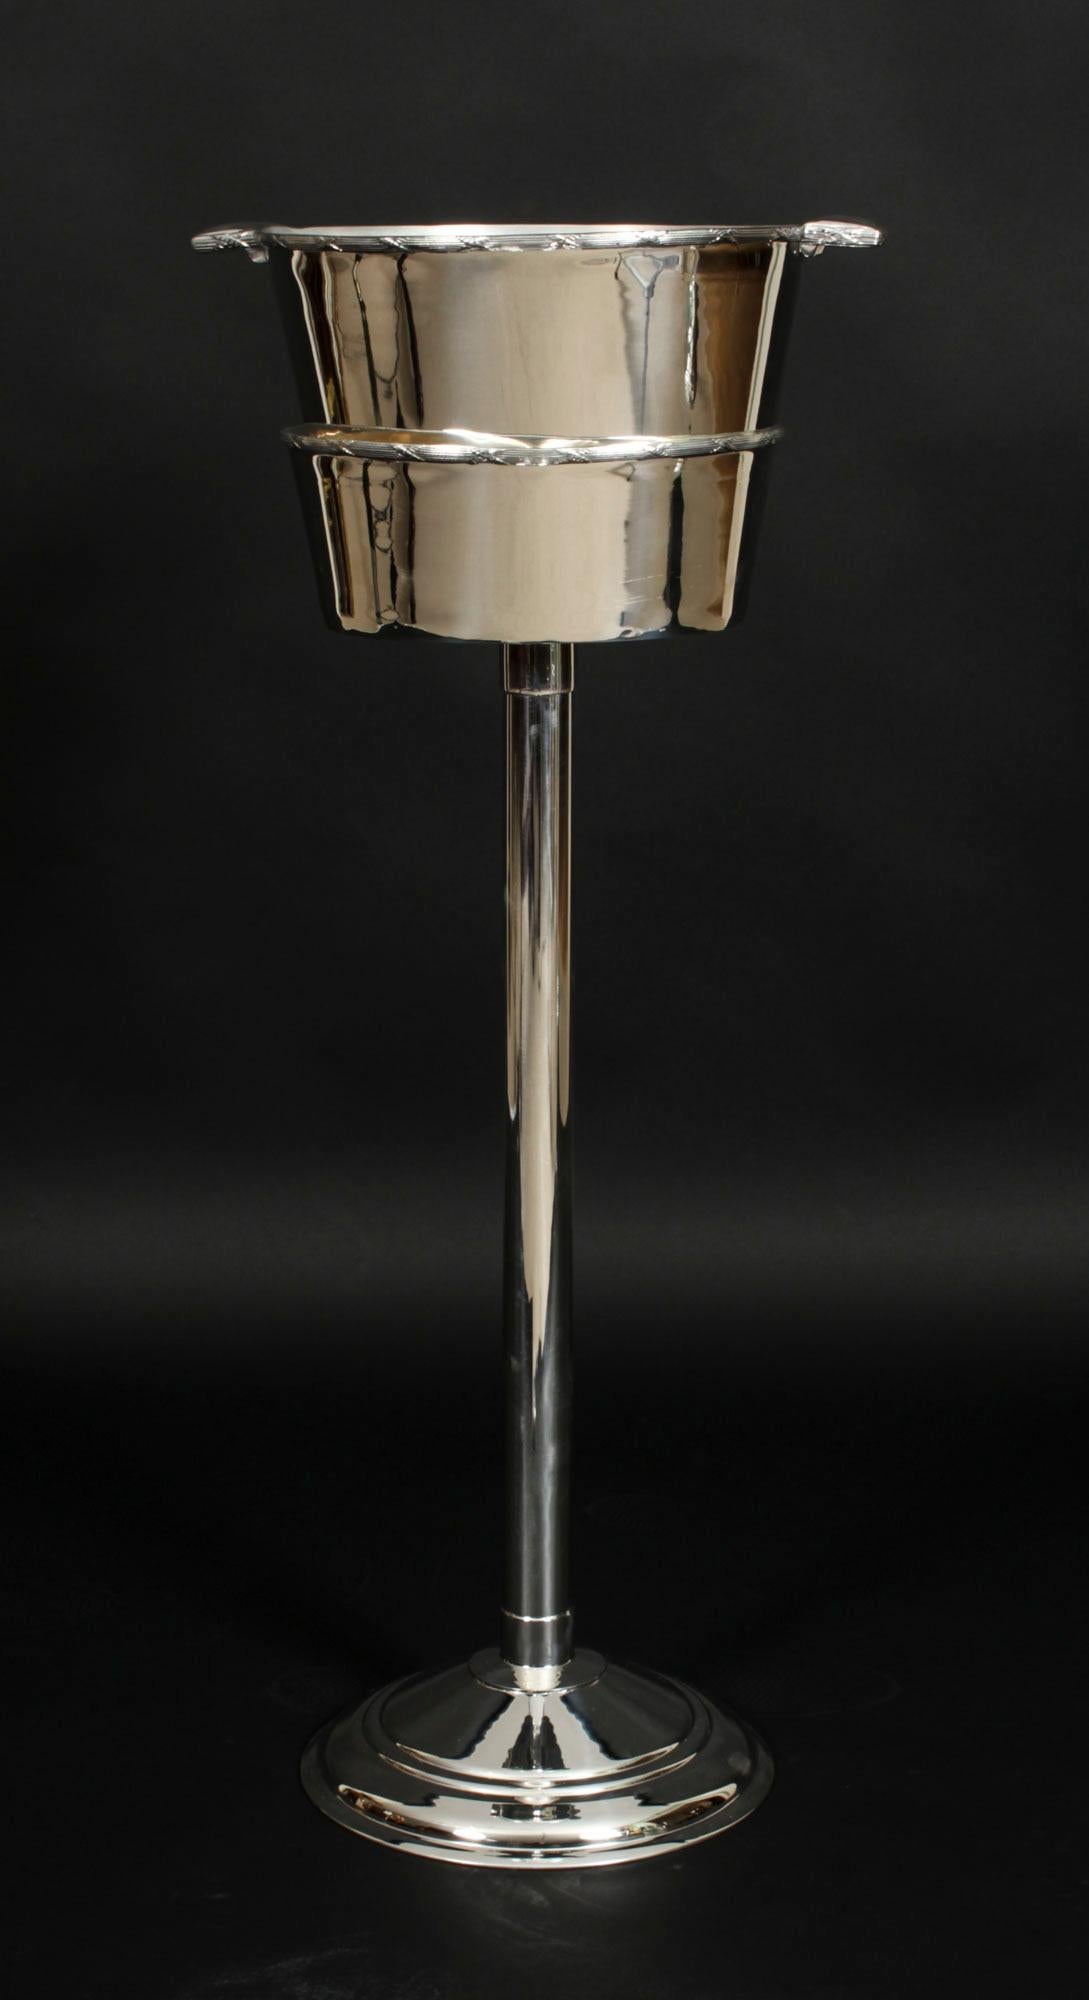 This is a fabulous silver plated champagne cooler on stand bearing the makers mark of the renowned silversmith,  Mappin & Webb, circa 1900 in date.

It is of beautiful design that is elegant and contemporary at the same time.

The simple but classic